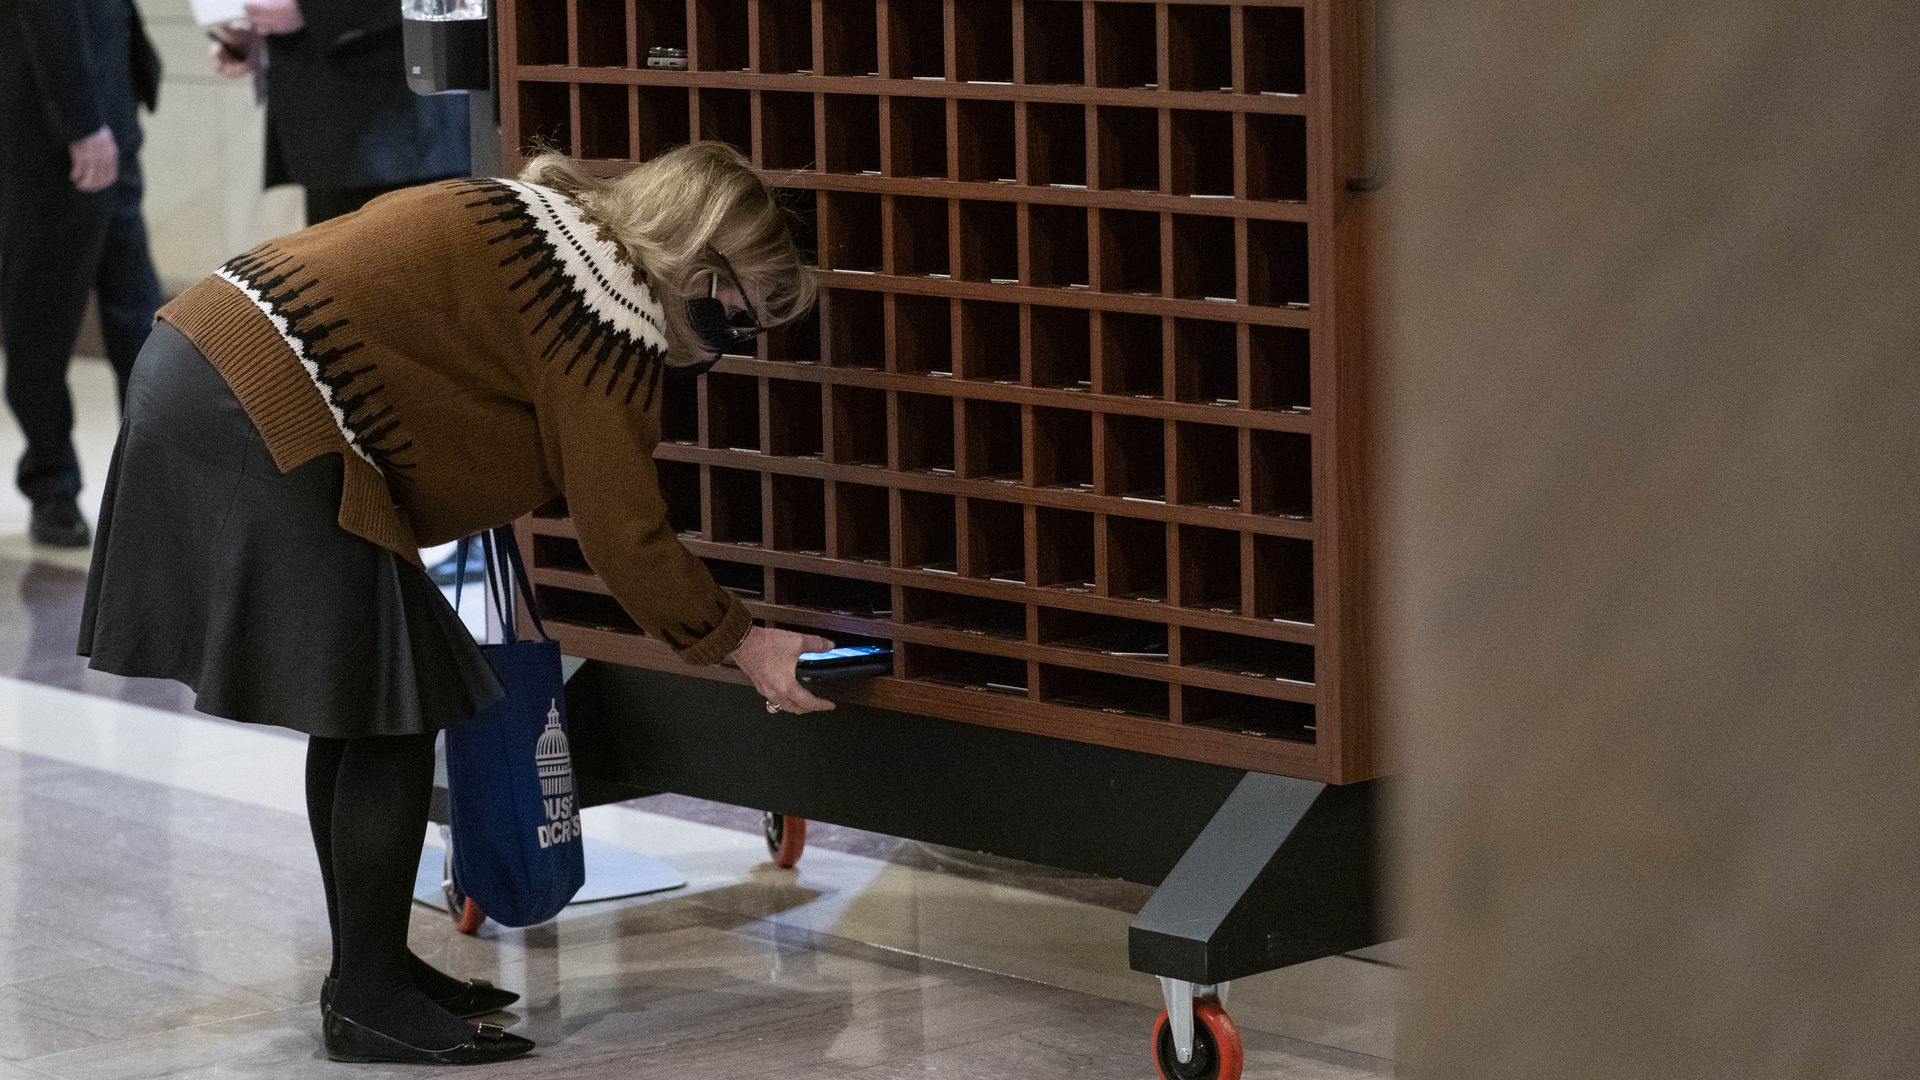 Rep. Debbie Dingell is seen storing her cellphone before walking into a classified briefing about the Jan. 6 Capitol attack.